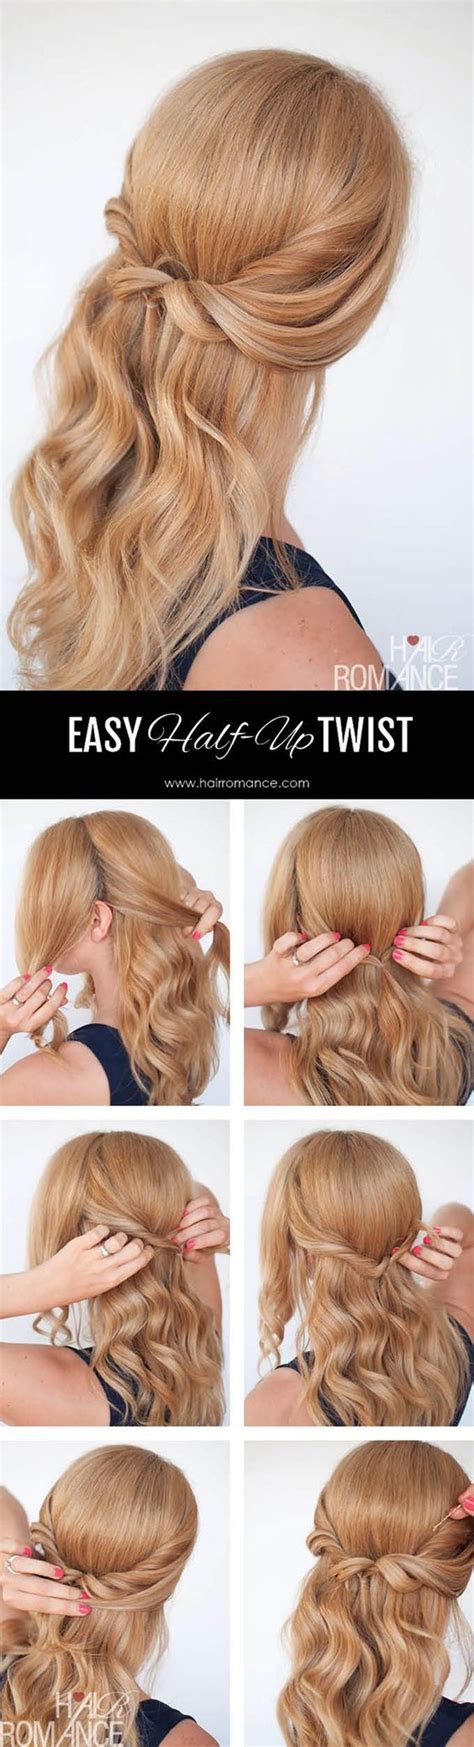 Simple hairstyles are the key if you want to style your hair in an easy way, especially if you're in a hurry or you have no patience for the complex styles. 40 Easy Hairstyles for Schools to Try in 2016